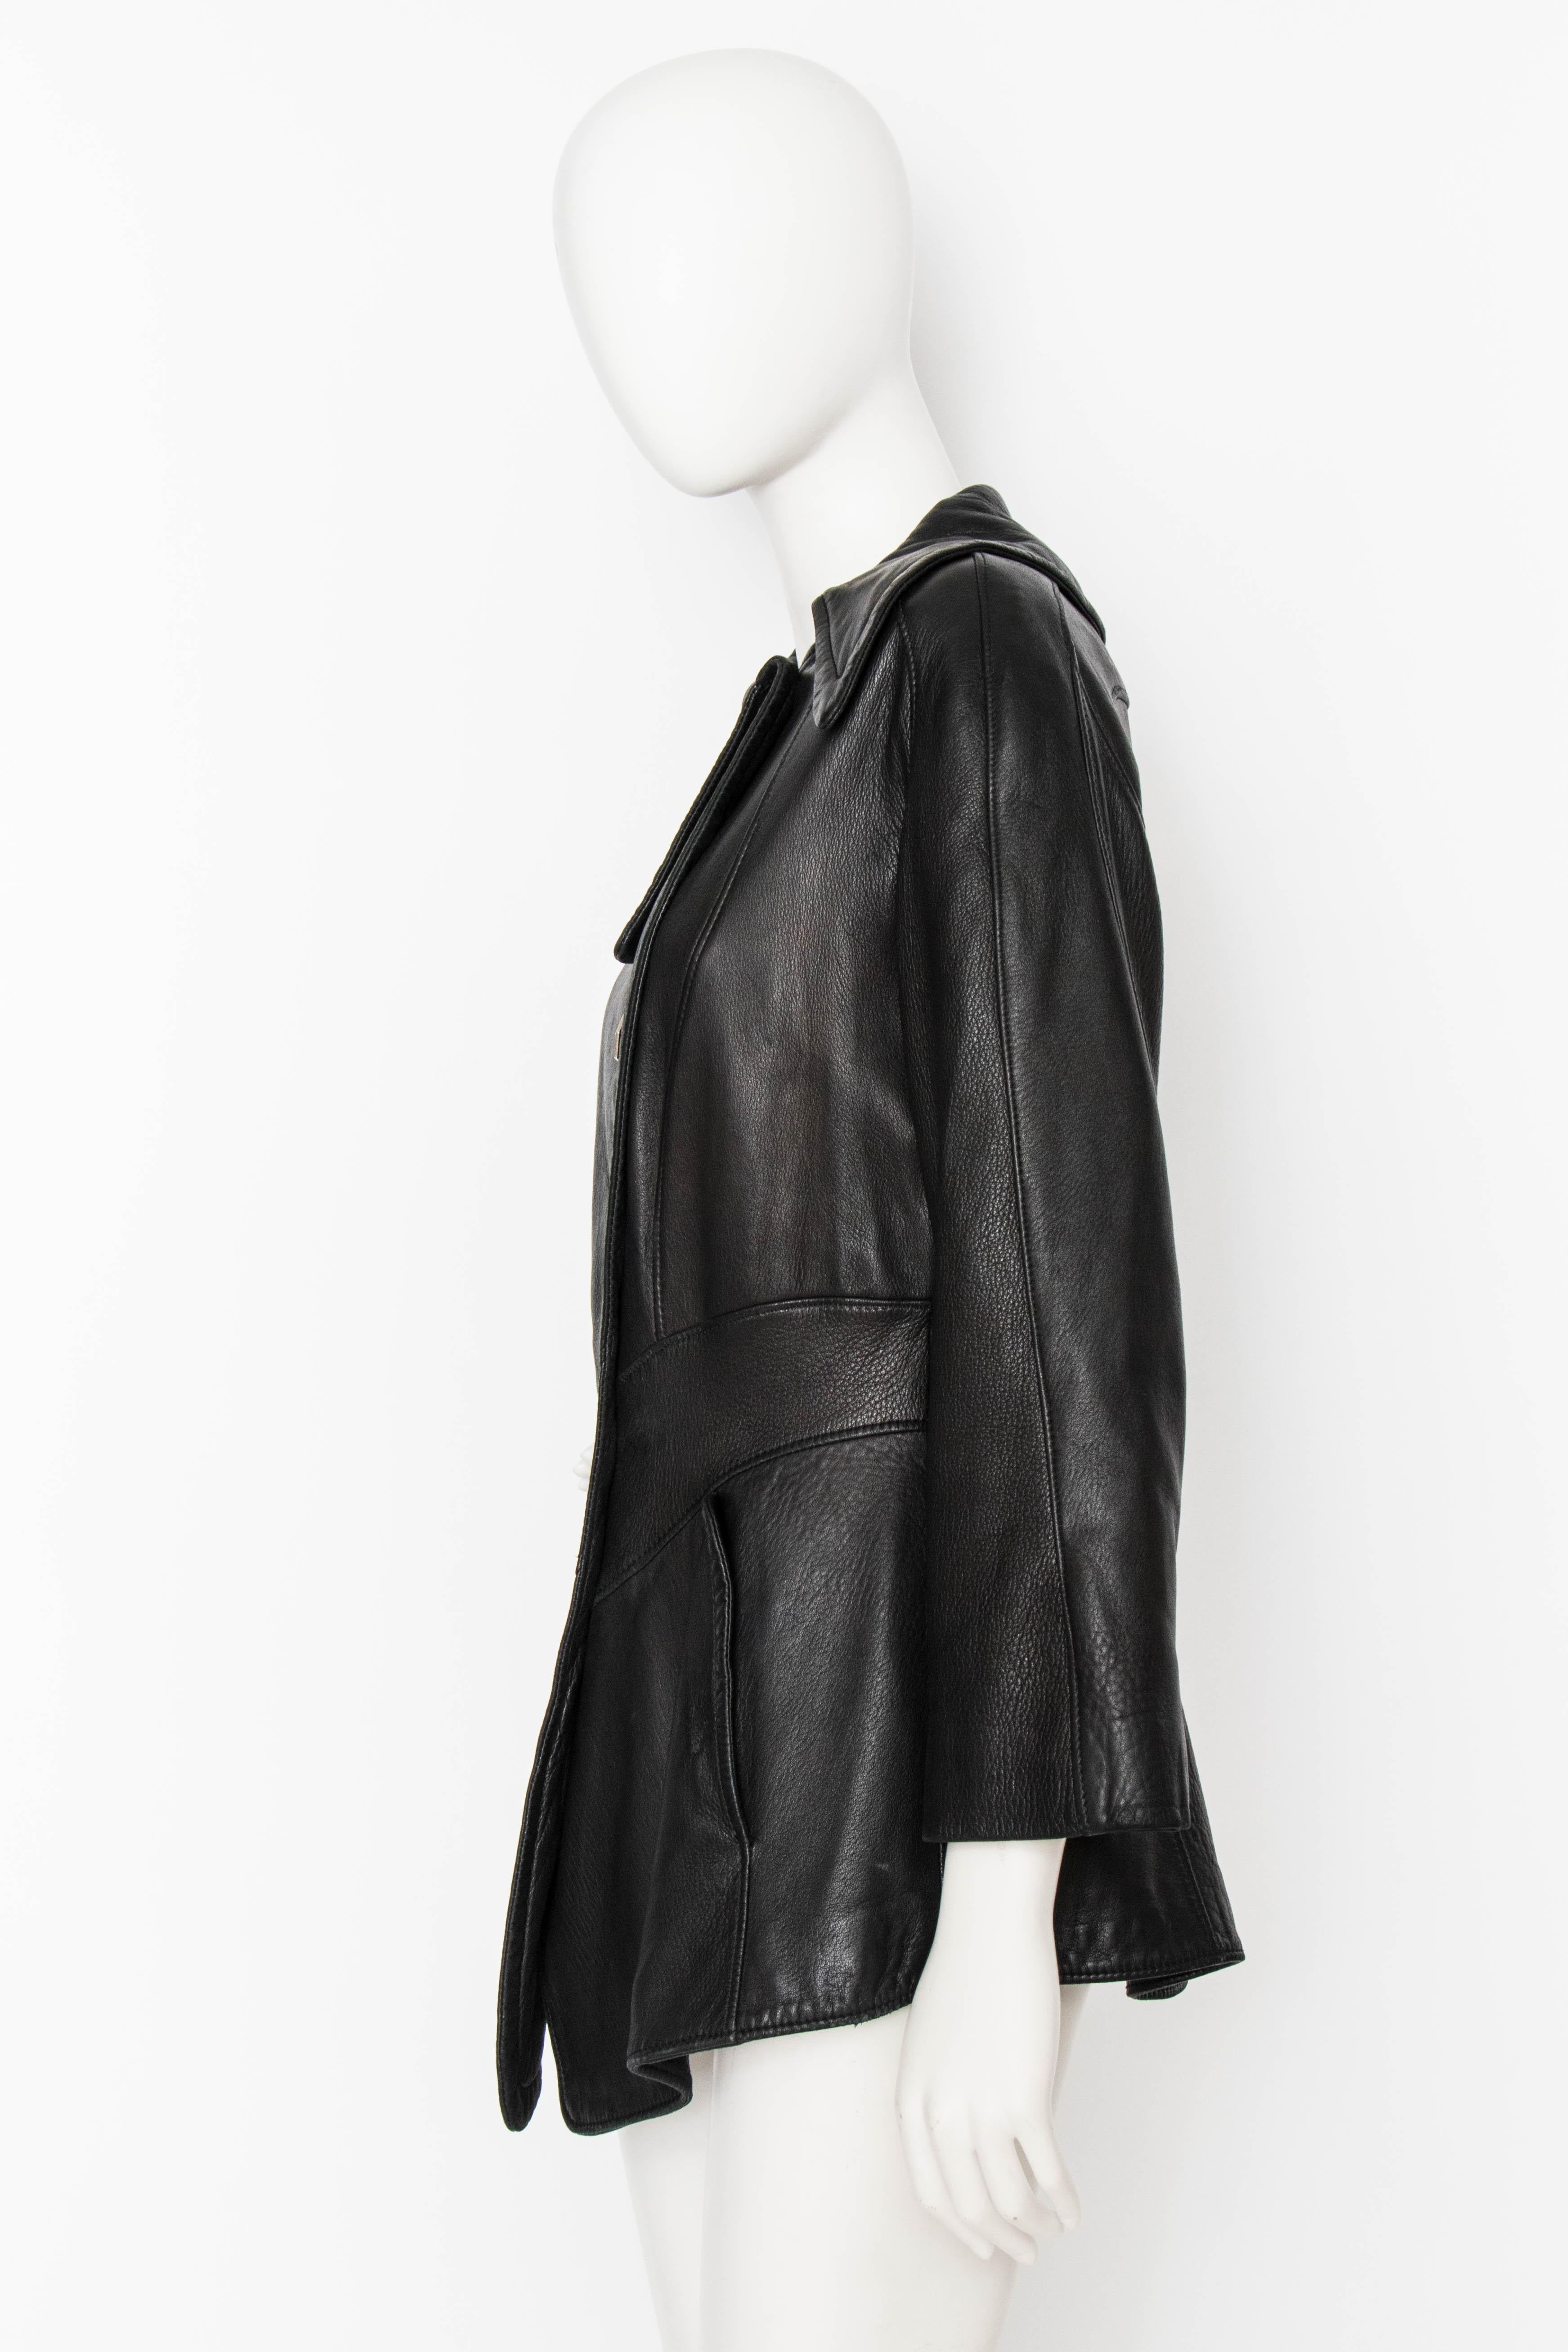 Women's or Men's A 1980s Vintage Thierry Mugler Black Leather Jacket 